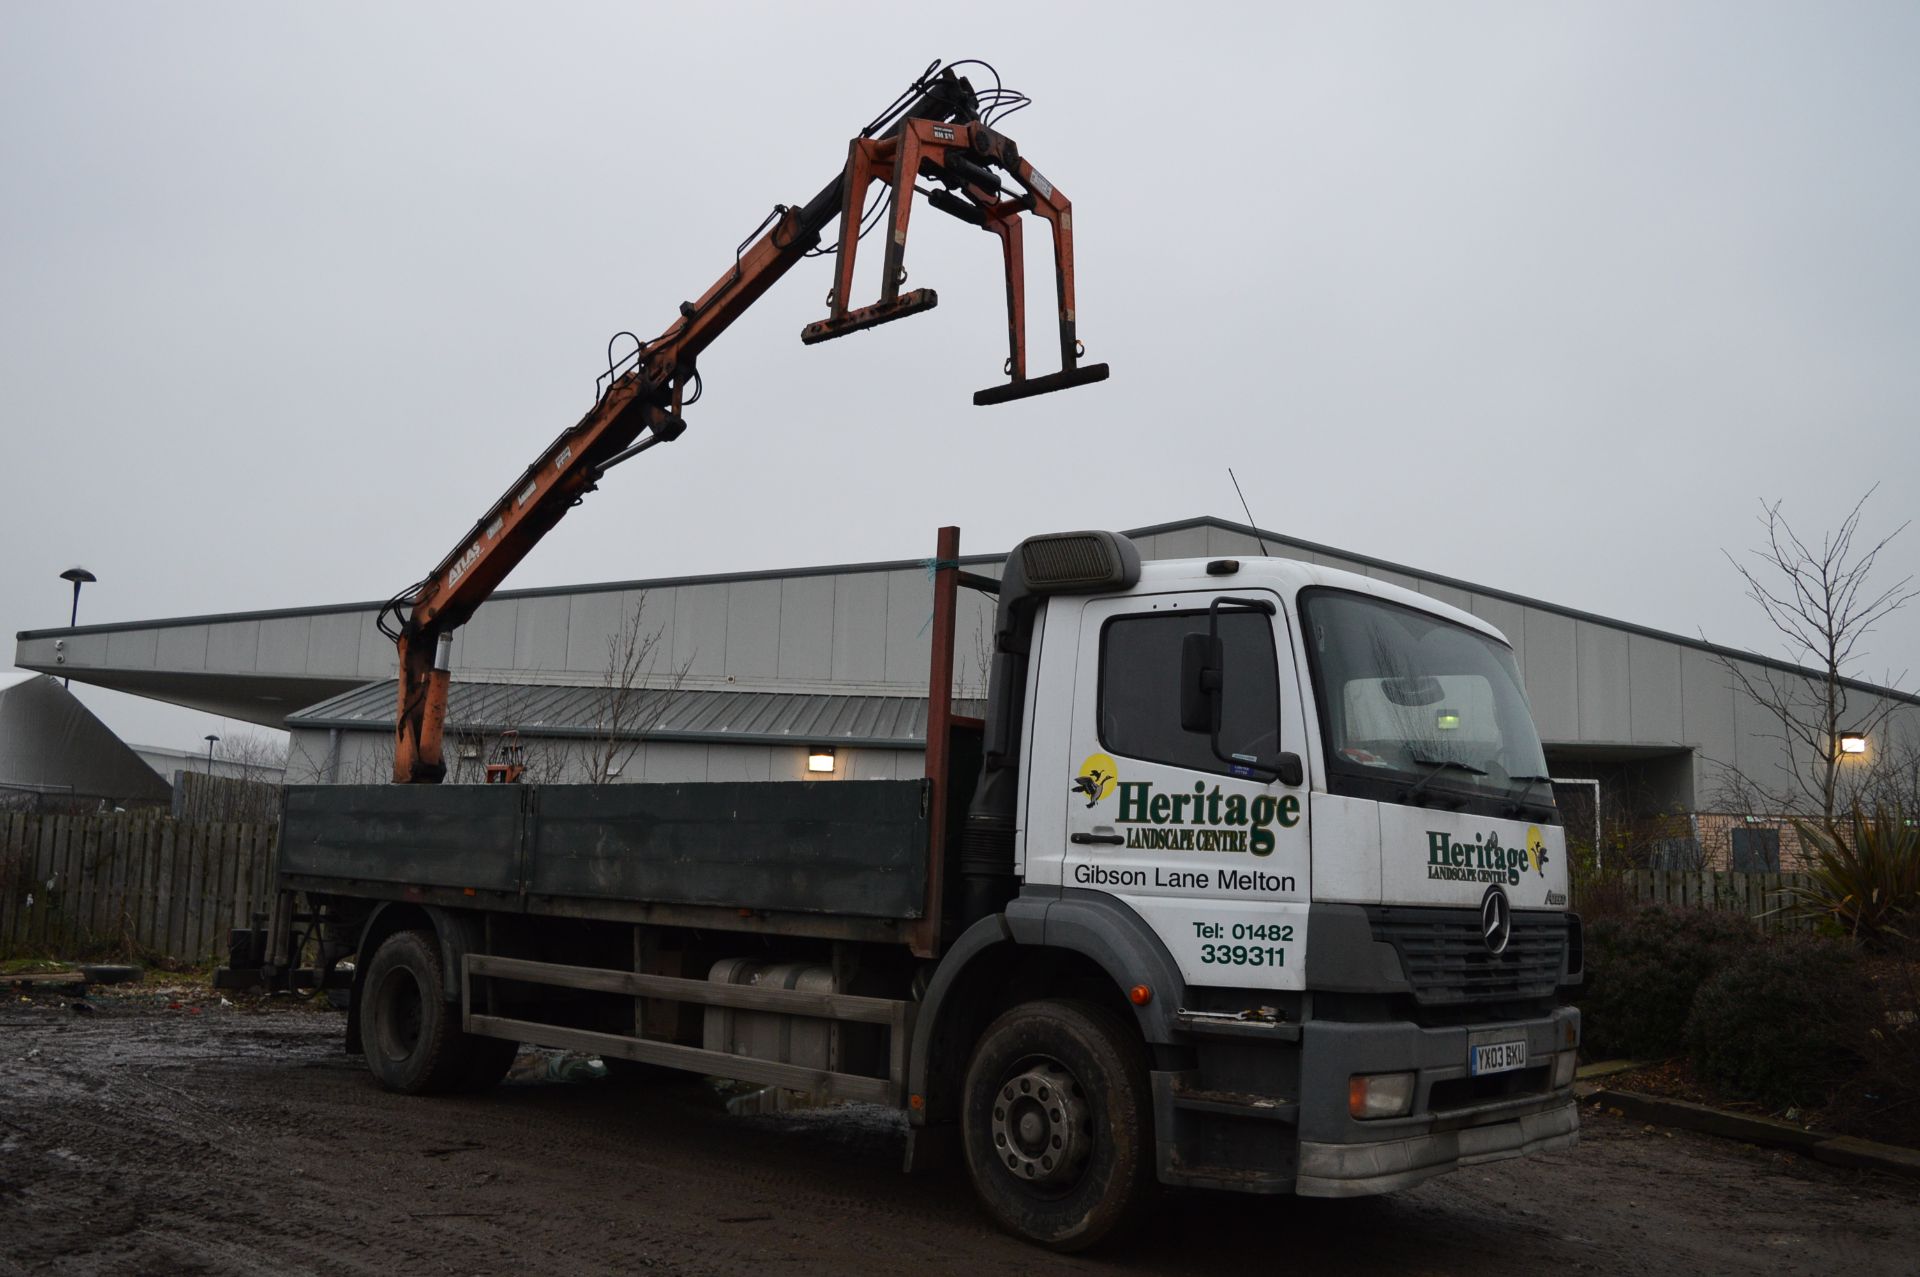 *Mercedes Atego 18 Tonne YX03 BKU With Atlas 3.3 KG Lift With Brick Grab (For Collection Monday